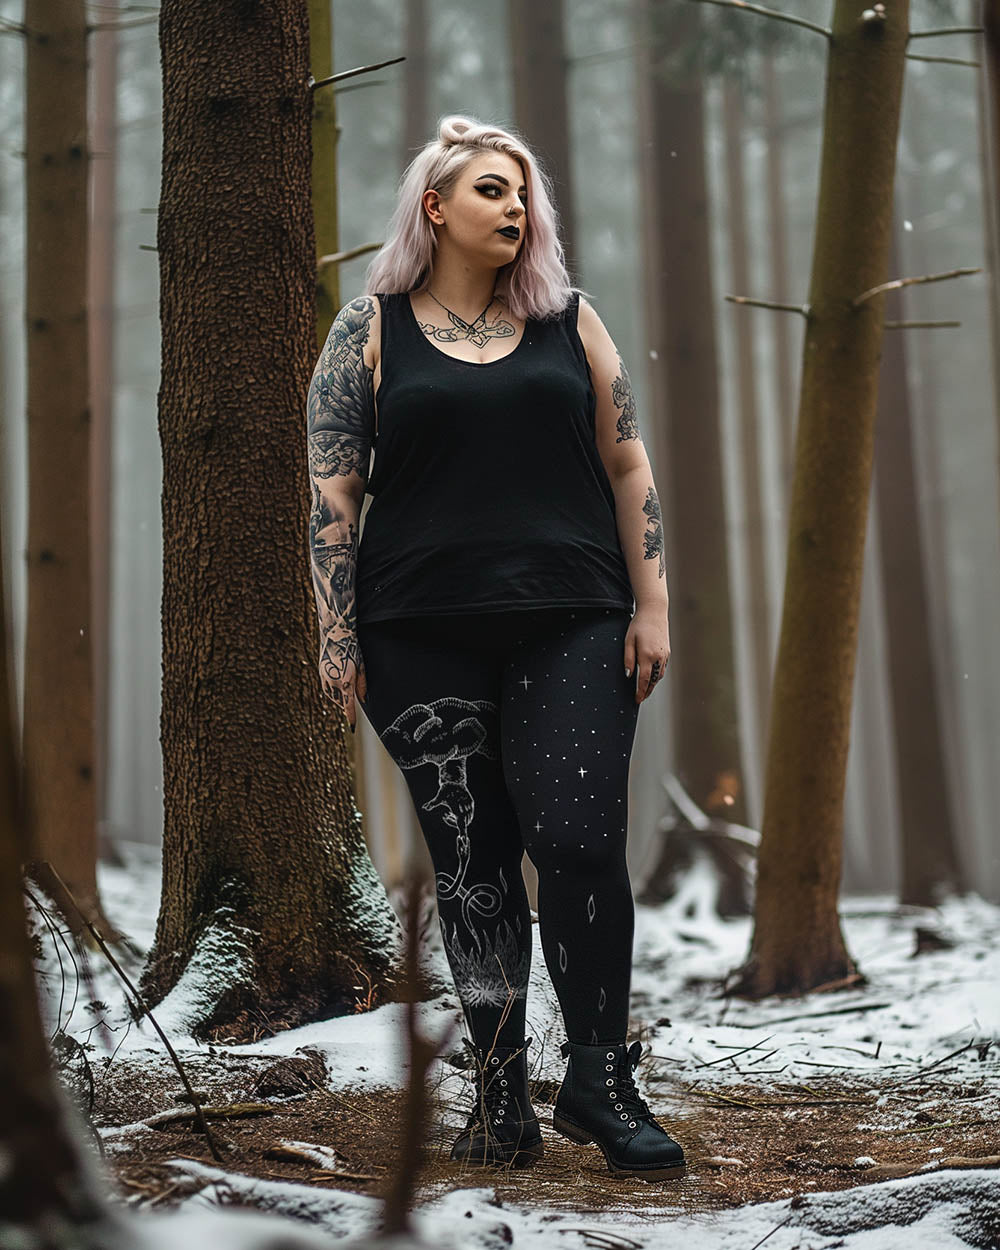 Constellation Plus Size Leggings - UPF 50+ Protection Witchy